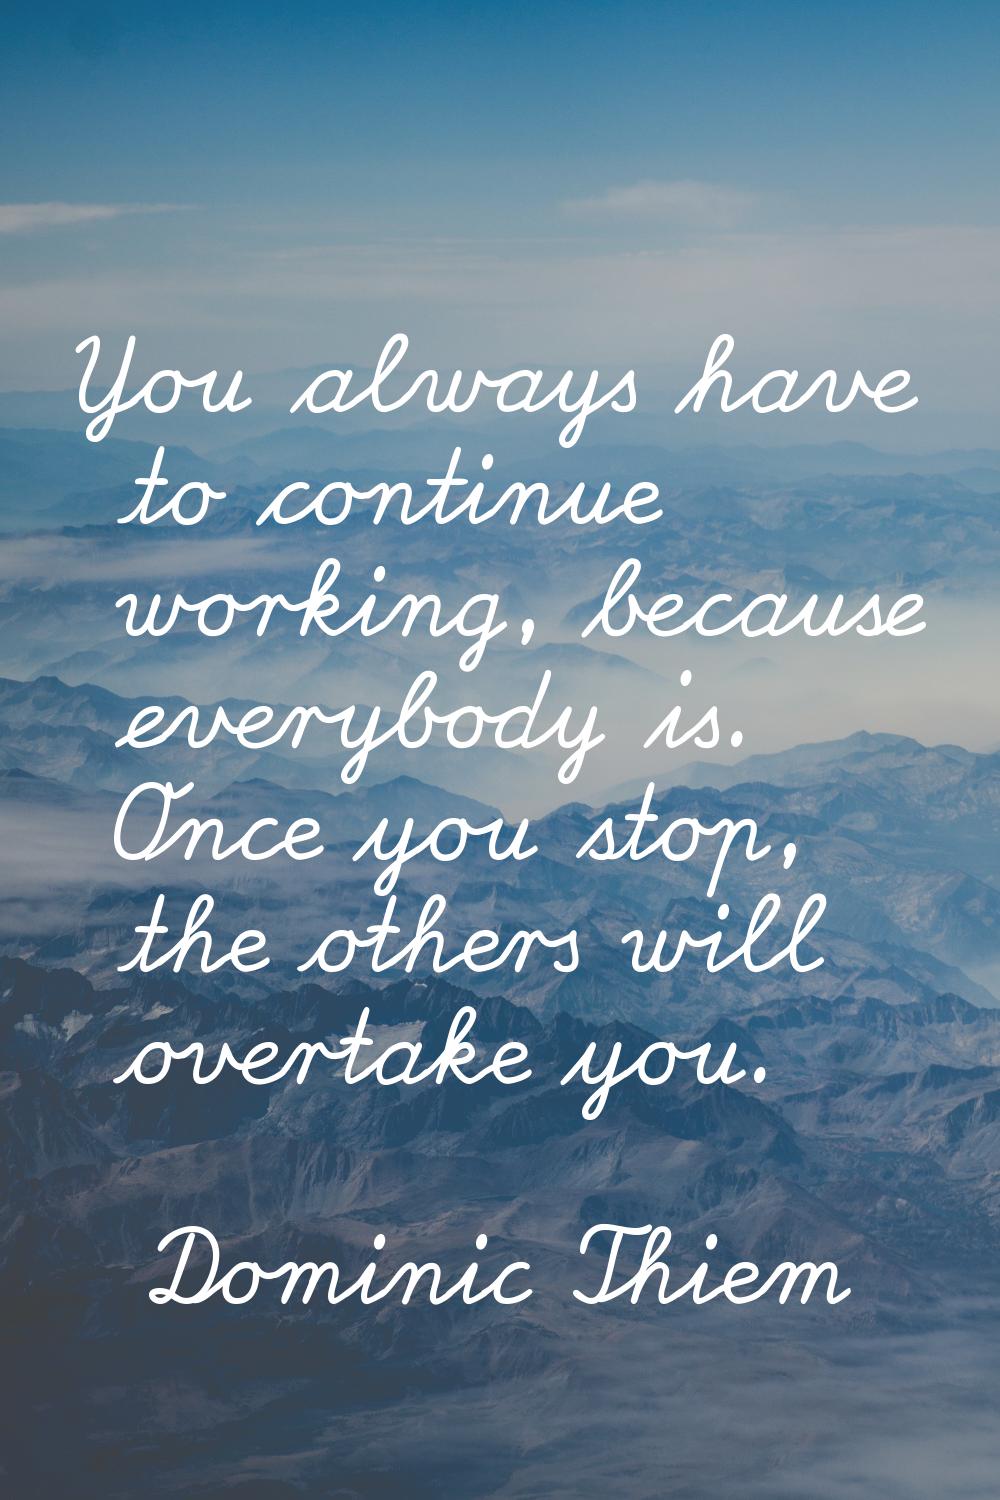 You always have to continue working, because everybody is. Once you stop, the others will overtake 